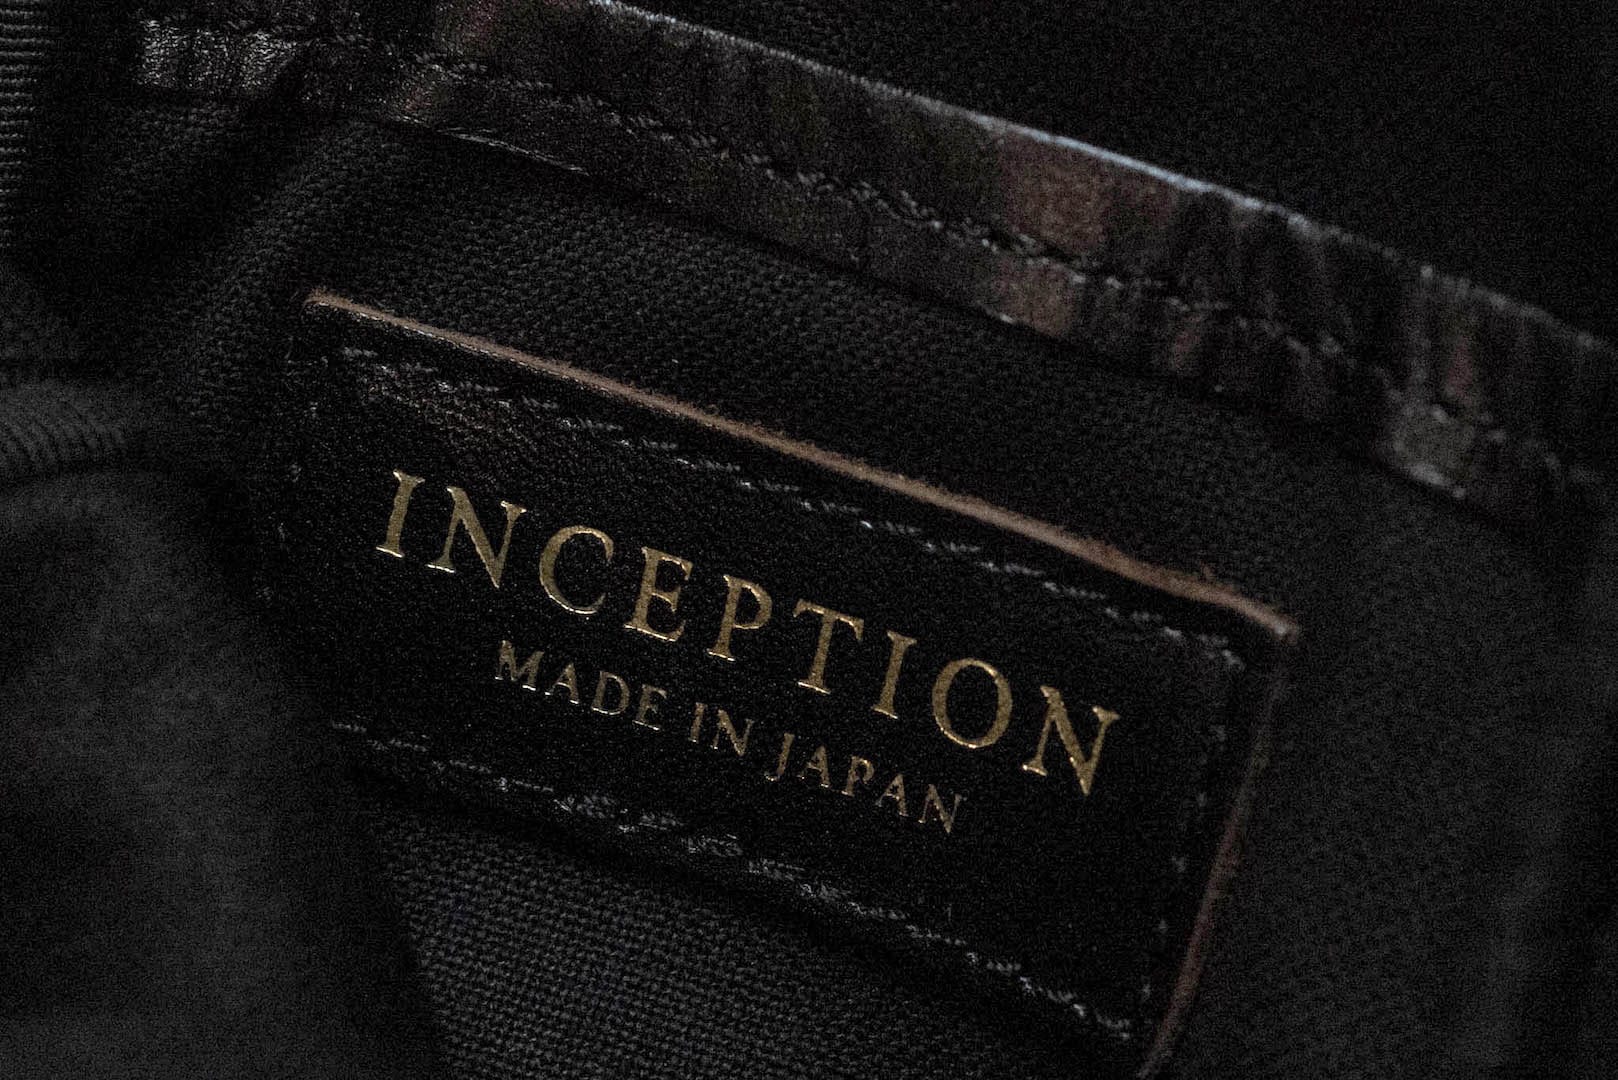 Inception by Accel Company Horsehide Utility Pouch Bag (Black Tea-cored)